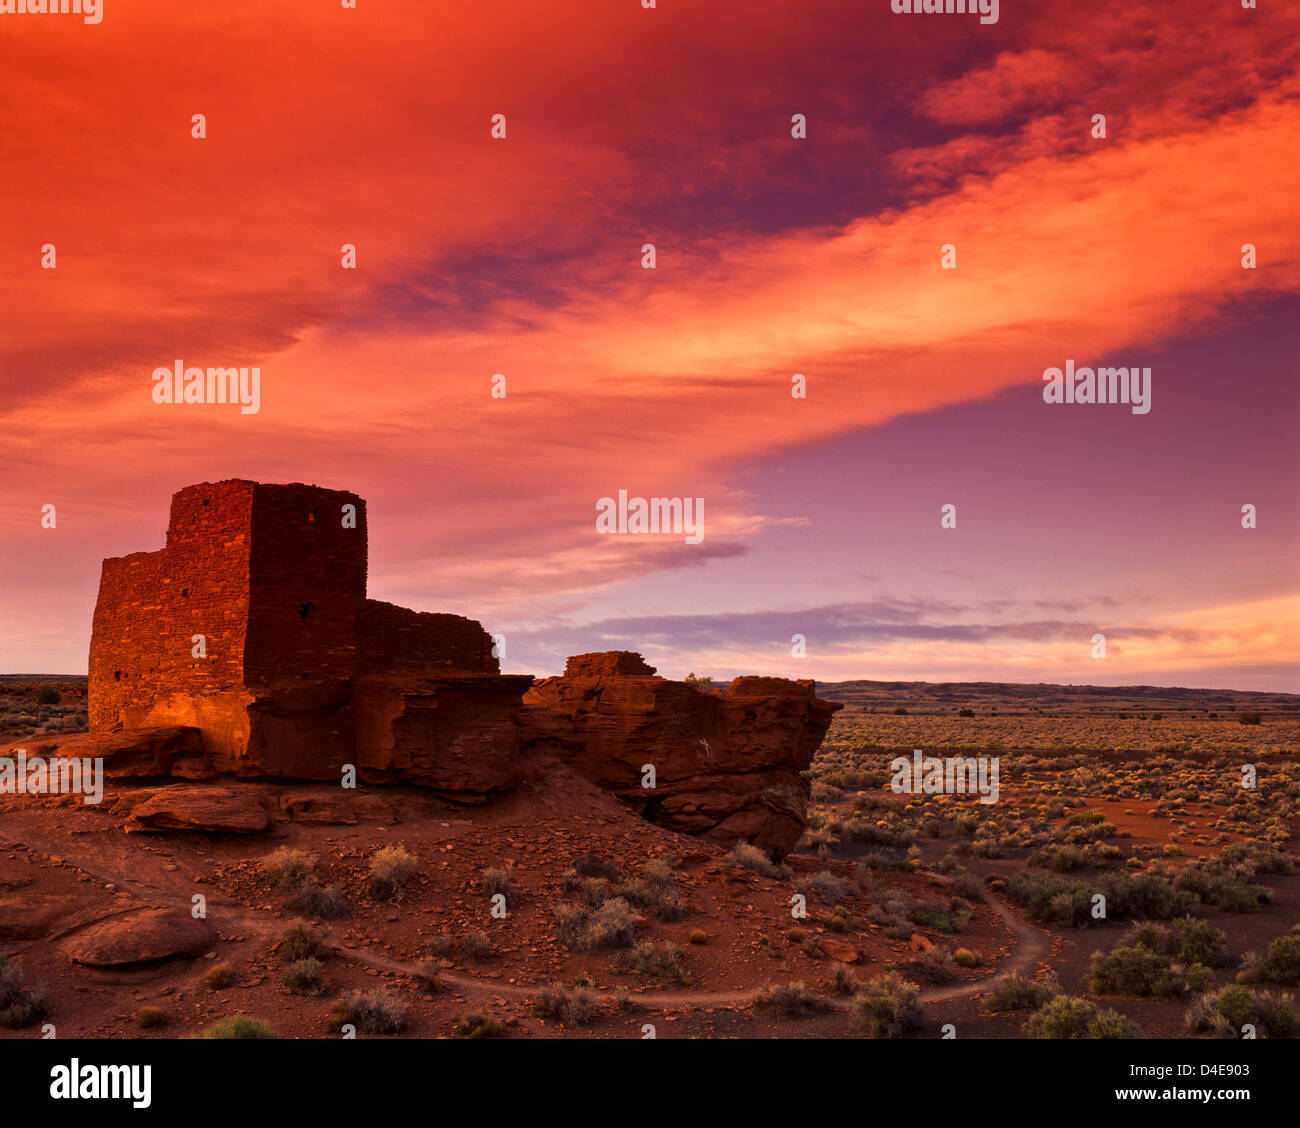 The Wupatki National Monument is a National Monument located in north-central Arizona, near Flagstaff. Stock Photo